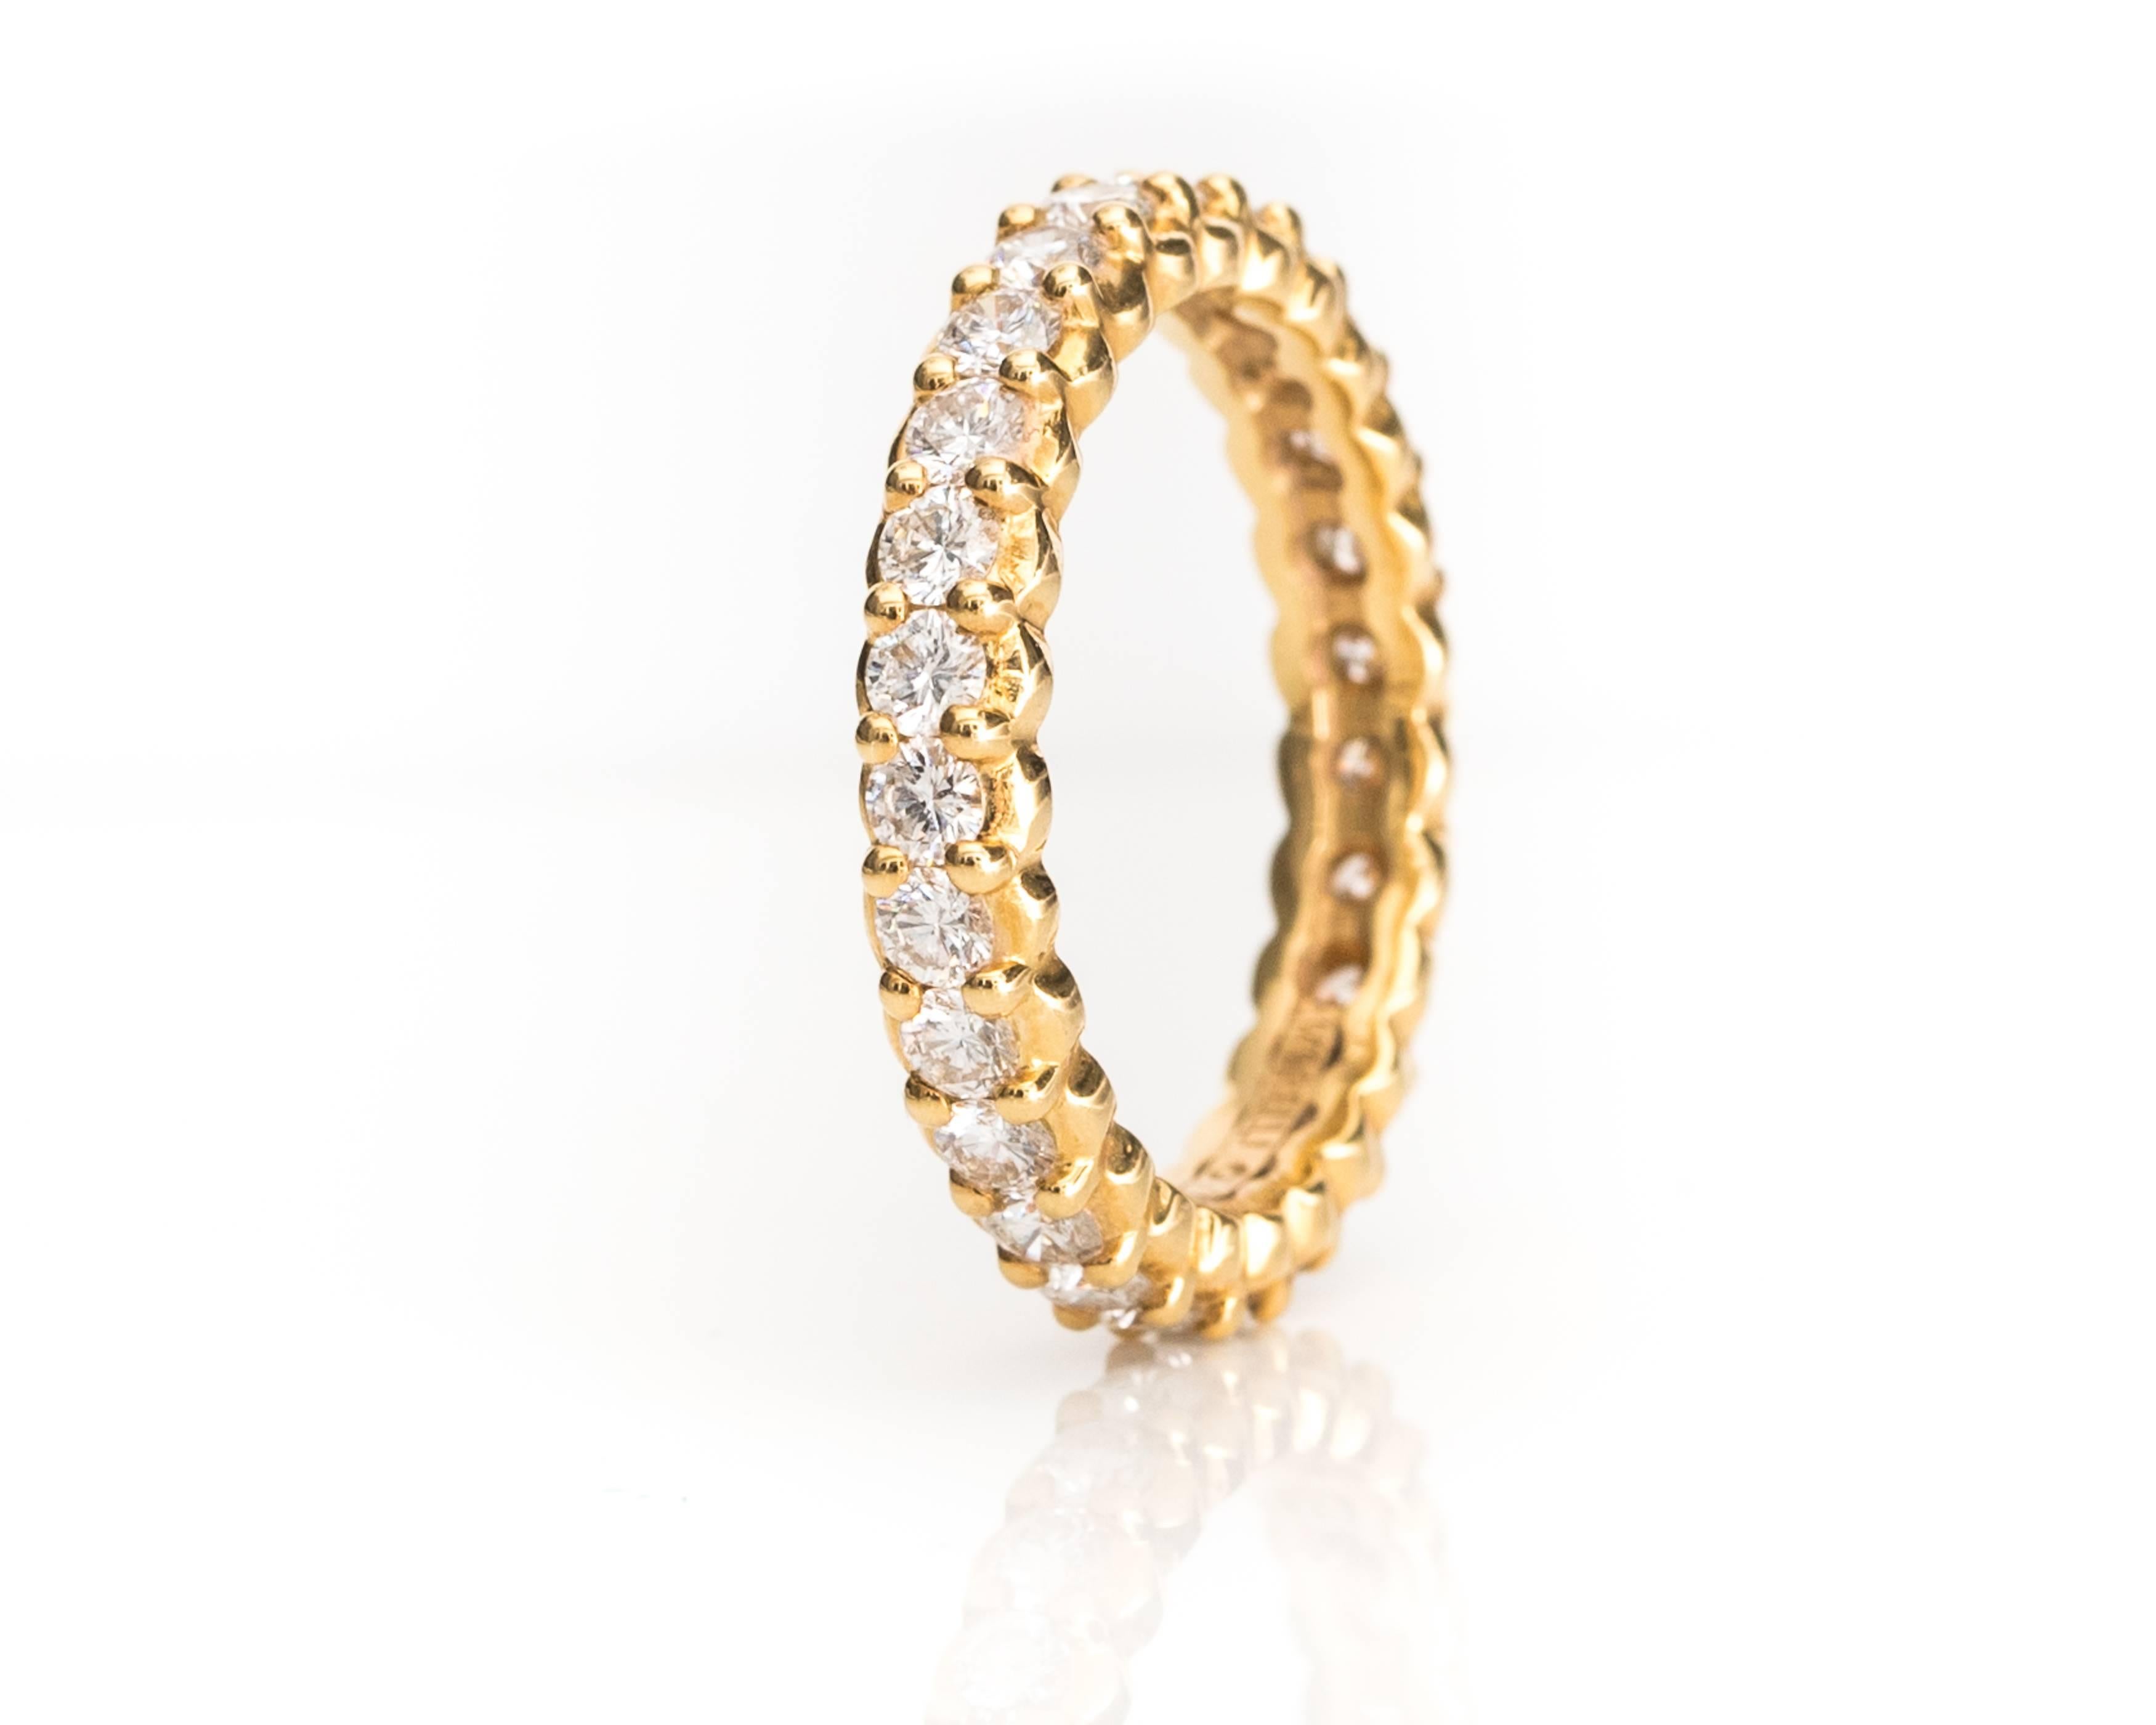 Gorgeous! This beautiful, handcrafted Paul Morelli 18 Karat Yellow Gold and Diamond Eternity Band is perfect to wear as a wedding band, alone or stacked. This Pinpoint Eternity Band features 1.5 carats total weight of round brilliant diamonds in a